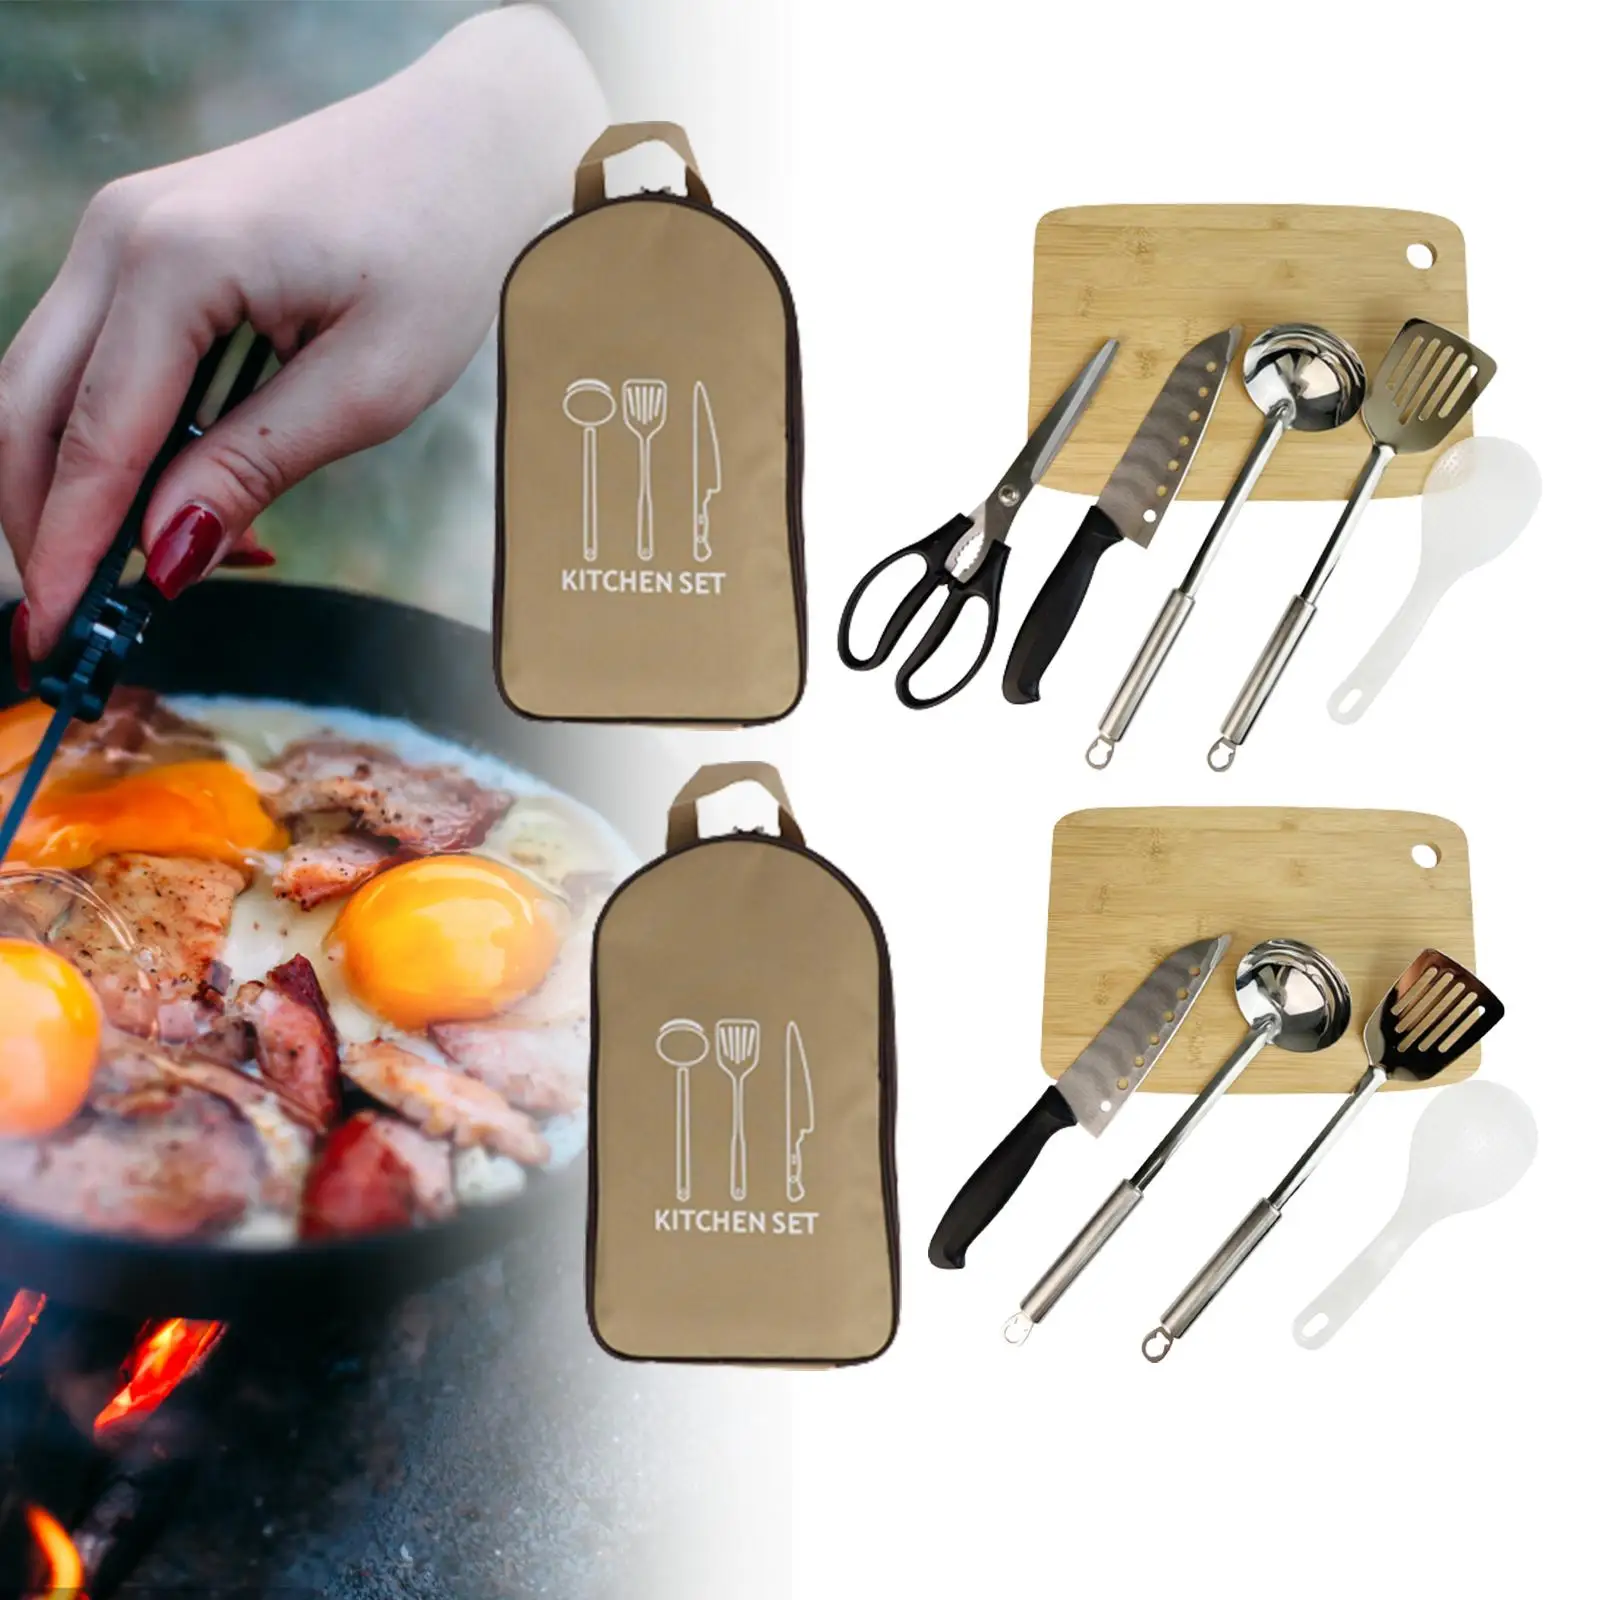 Campchen Cooking Utensil Set, Outdoor Portable Camping Cookware, for BBQ Backyard Backpacking